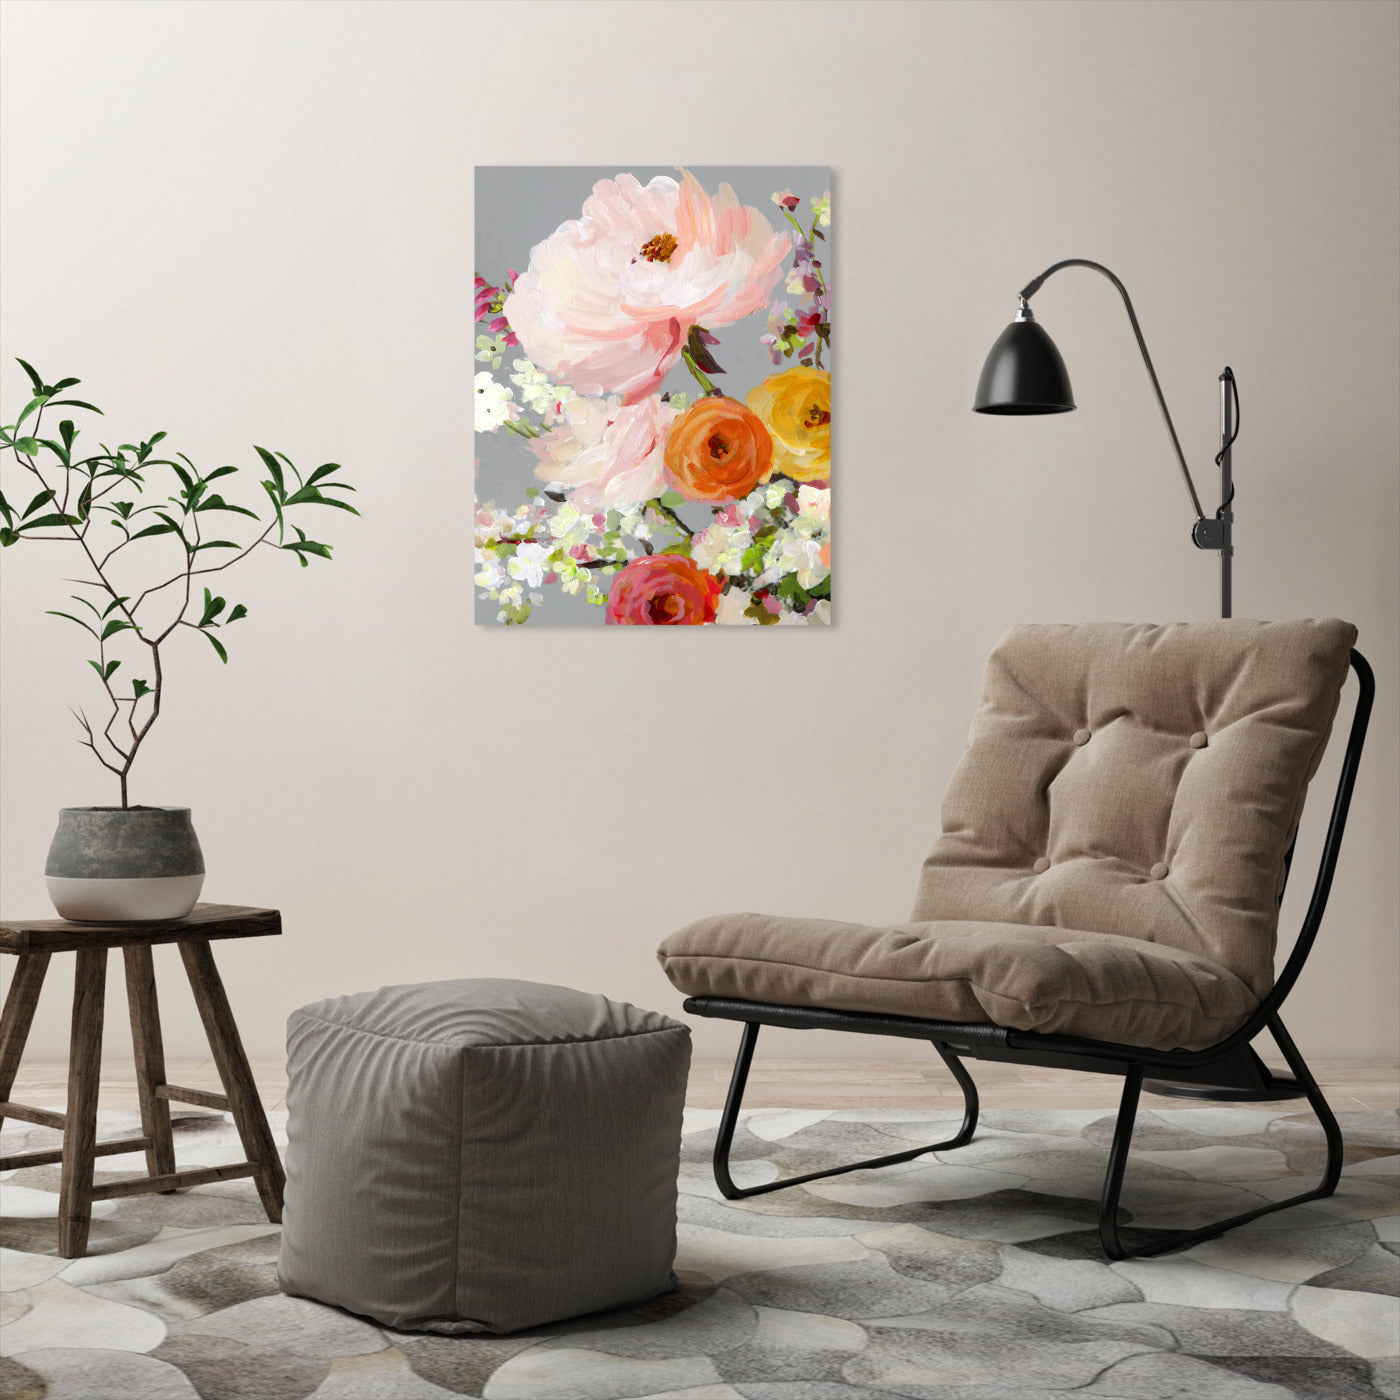 Flower Story Ii by PI Creative Art - Wrapped Canvas - Americanflat